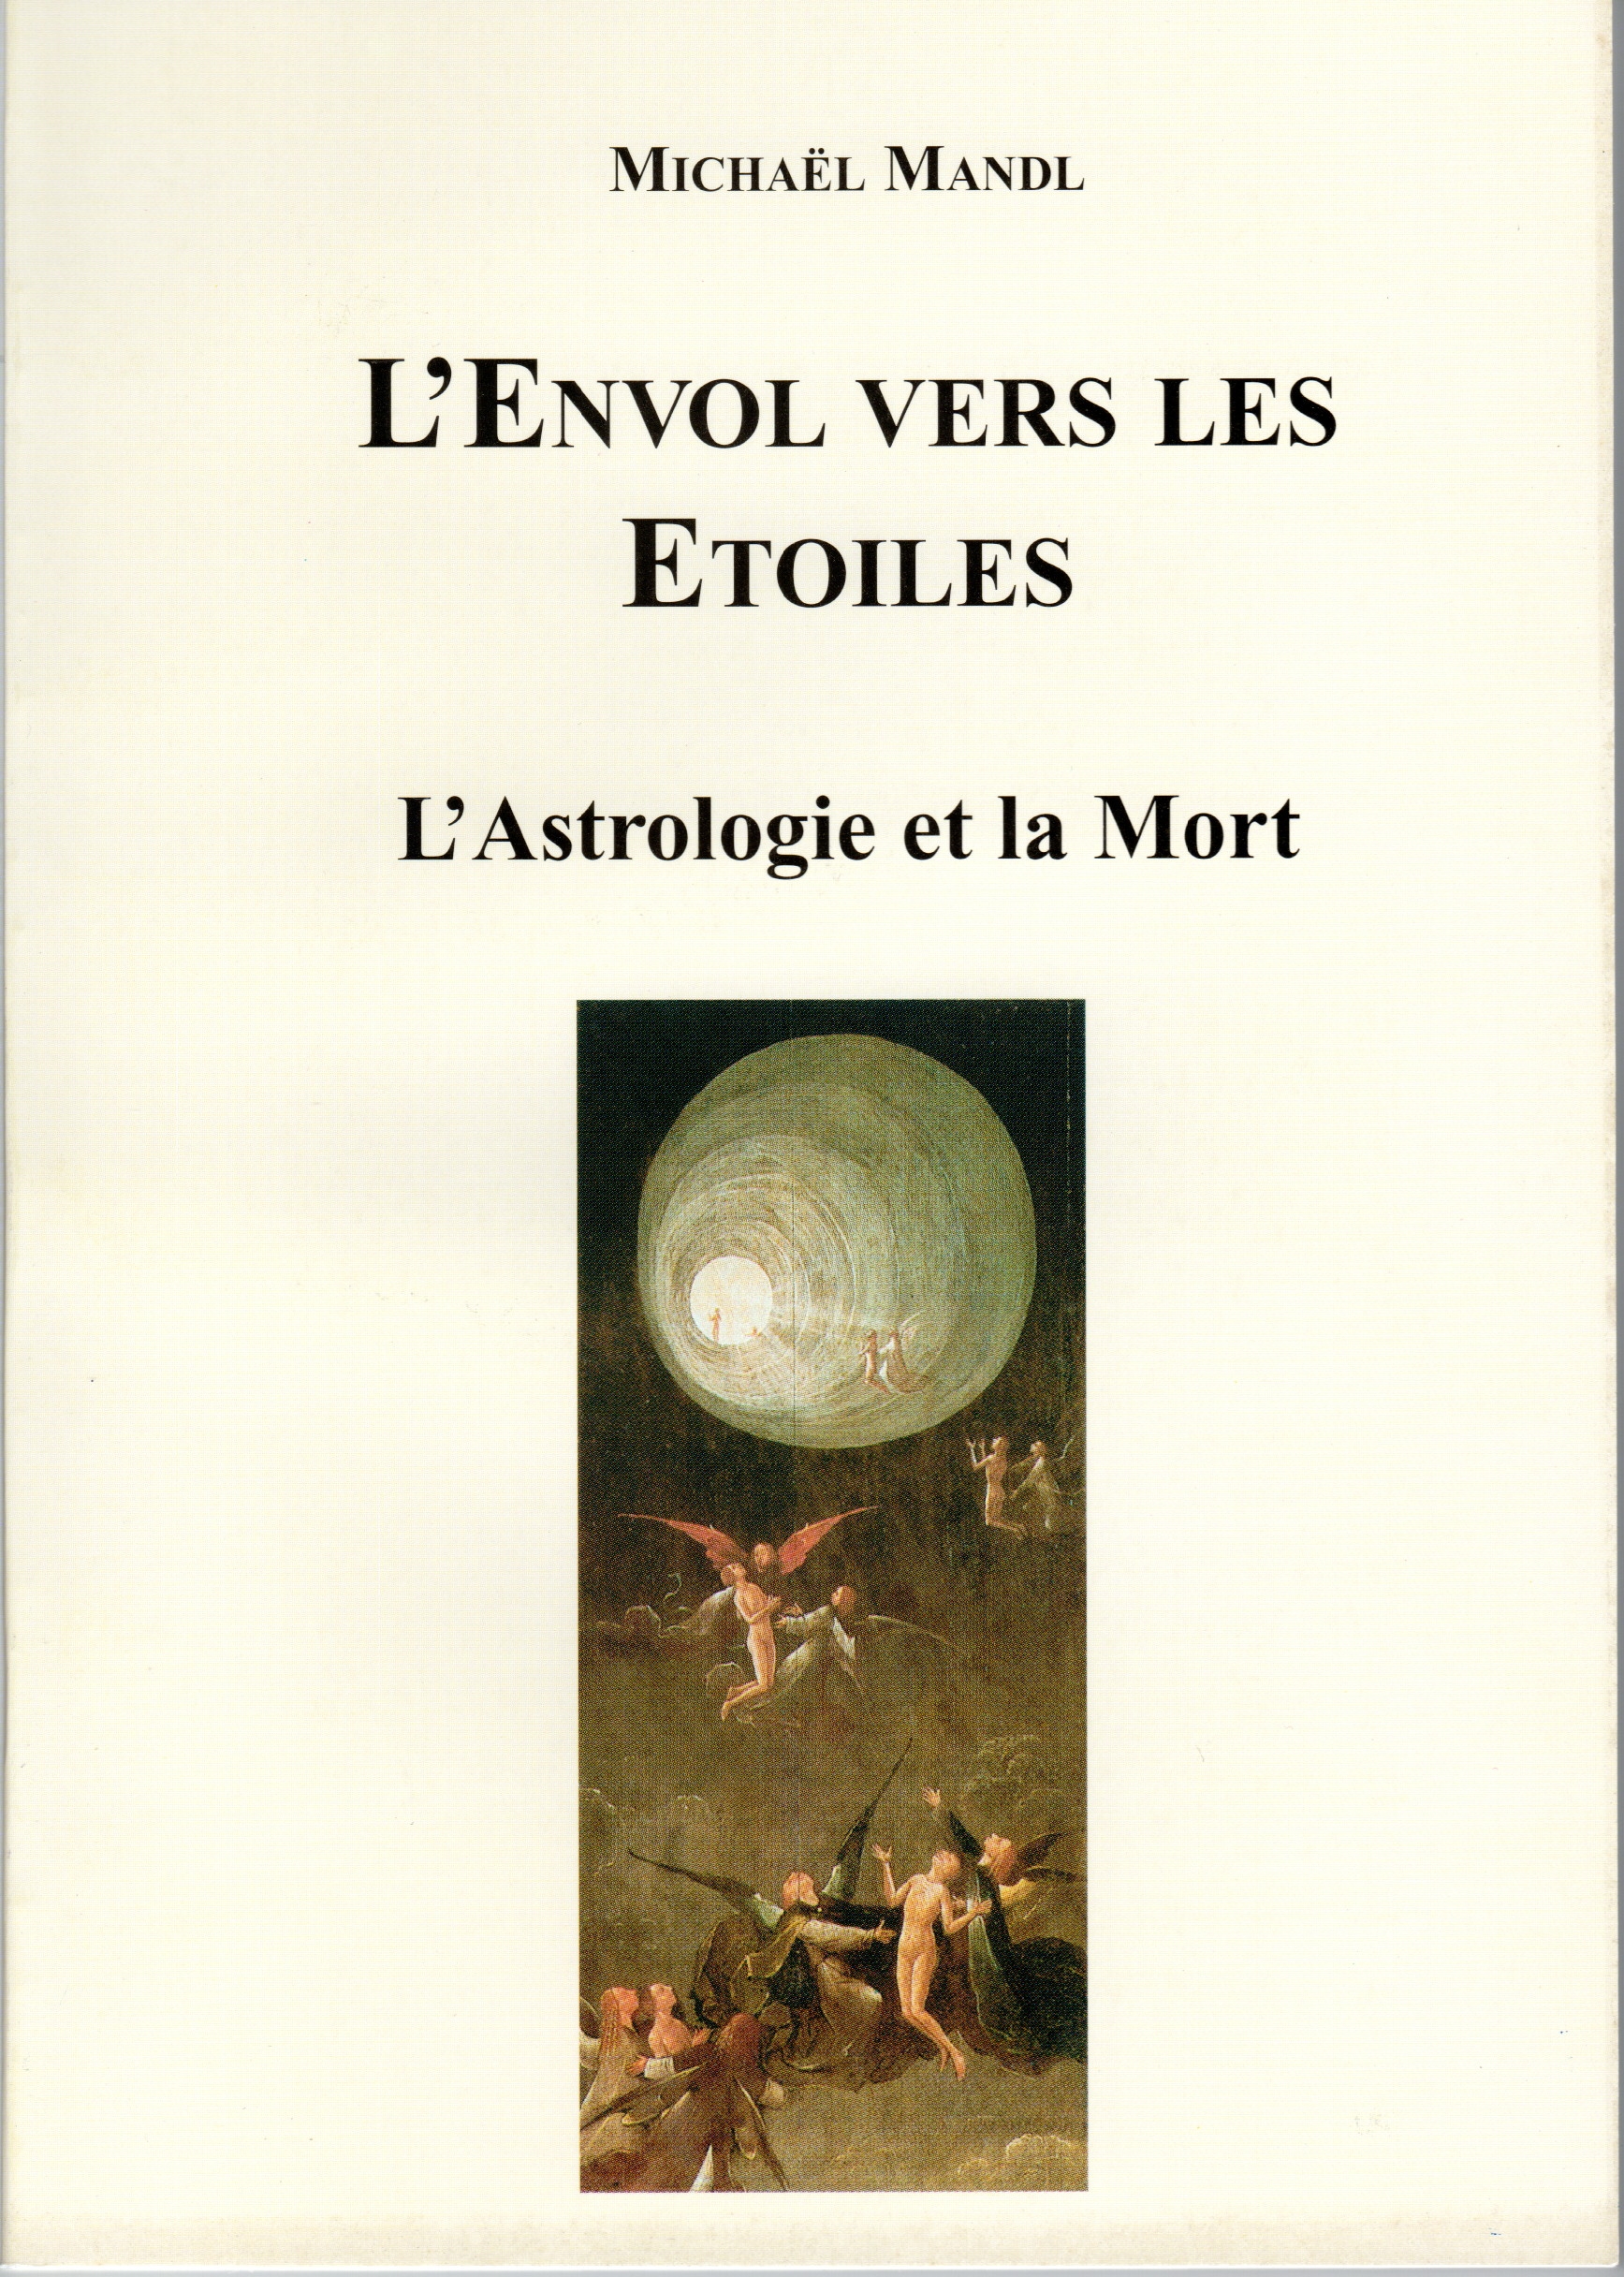 You are currently viewing L’Envol vers les Etoiles